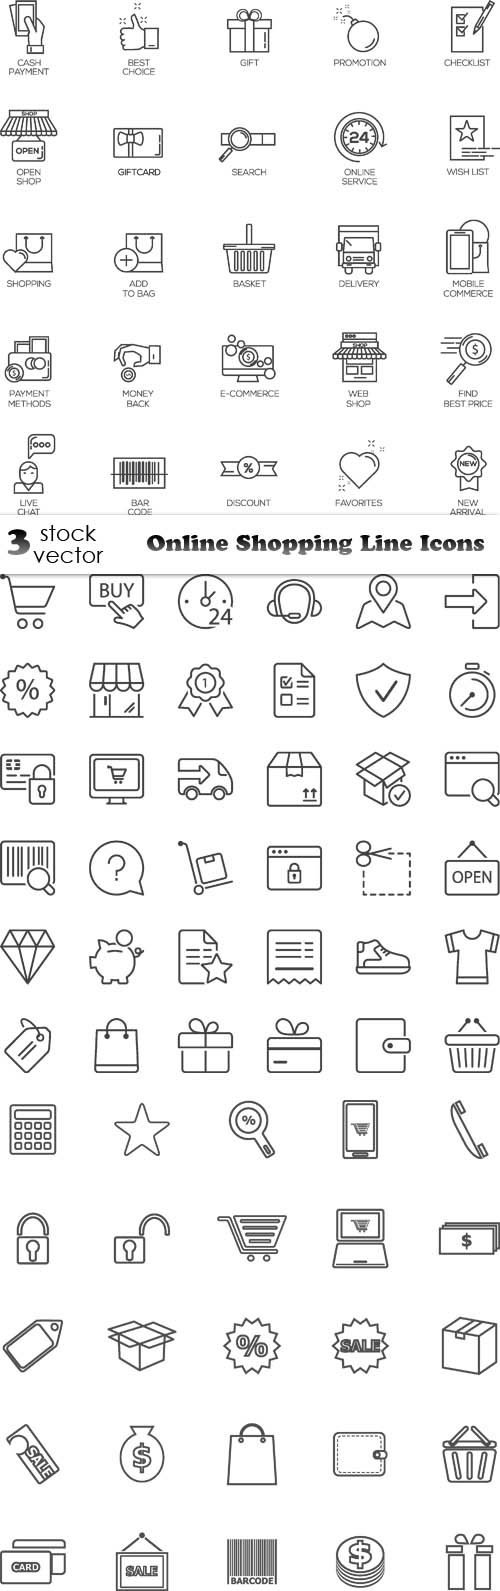 Vectors - Online Shopping Line Icons